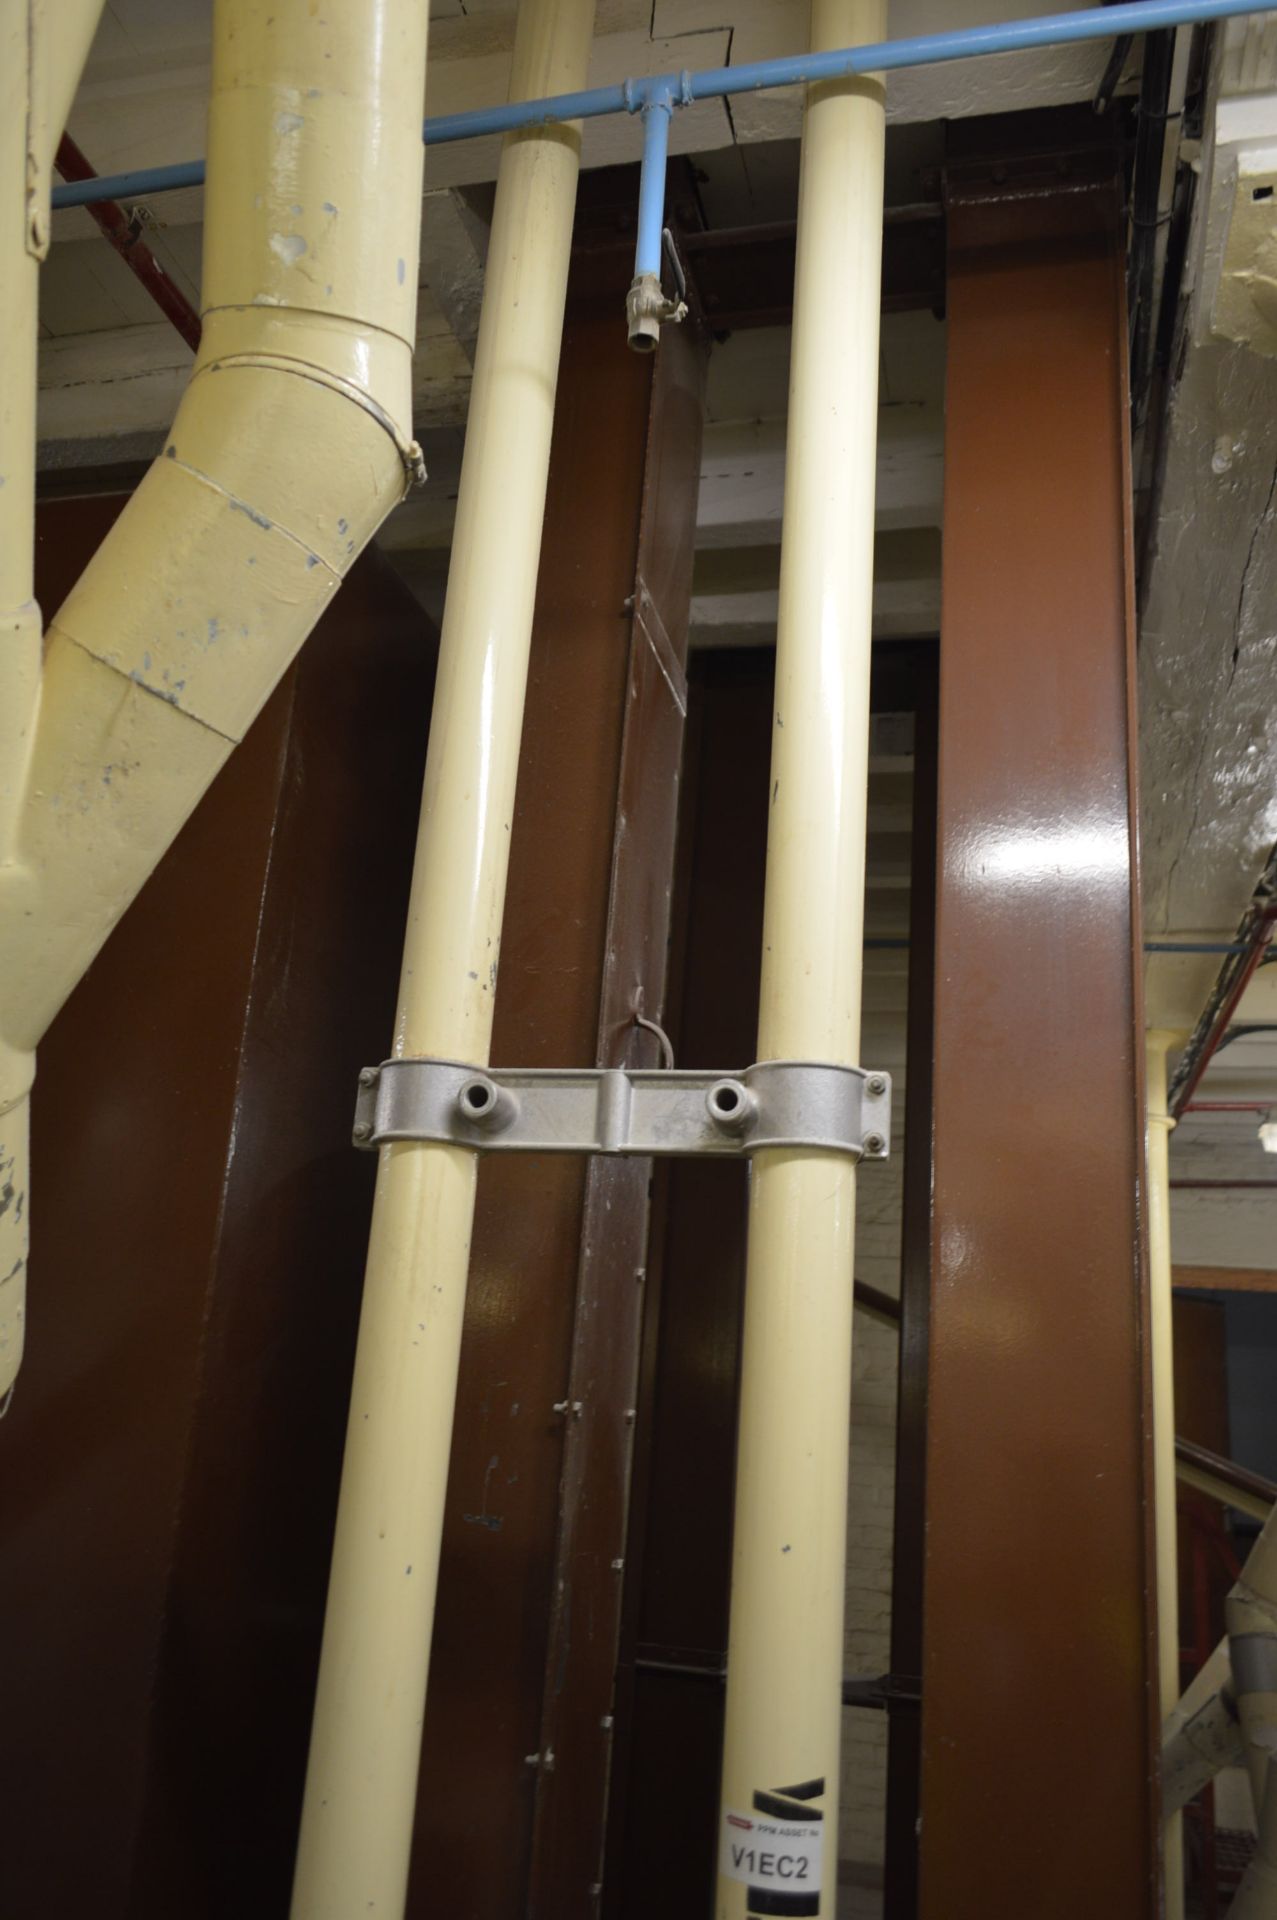 Entecon 75mm dia. Tubular Disc and Rope Elevator, serial no. 86/32629-15.25, with electric motor - Image 2 of 2